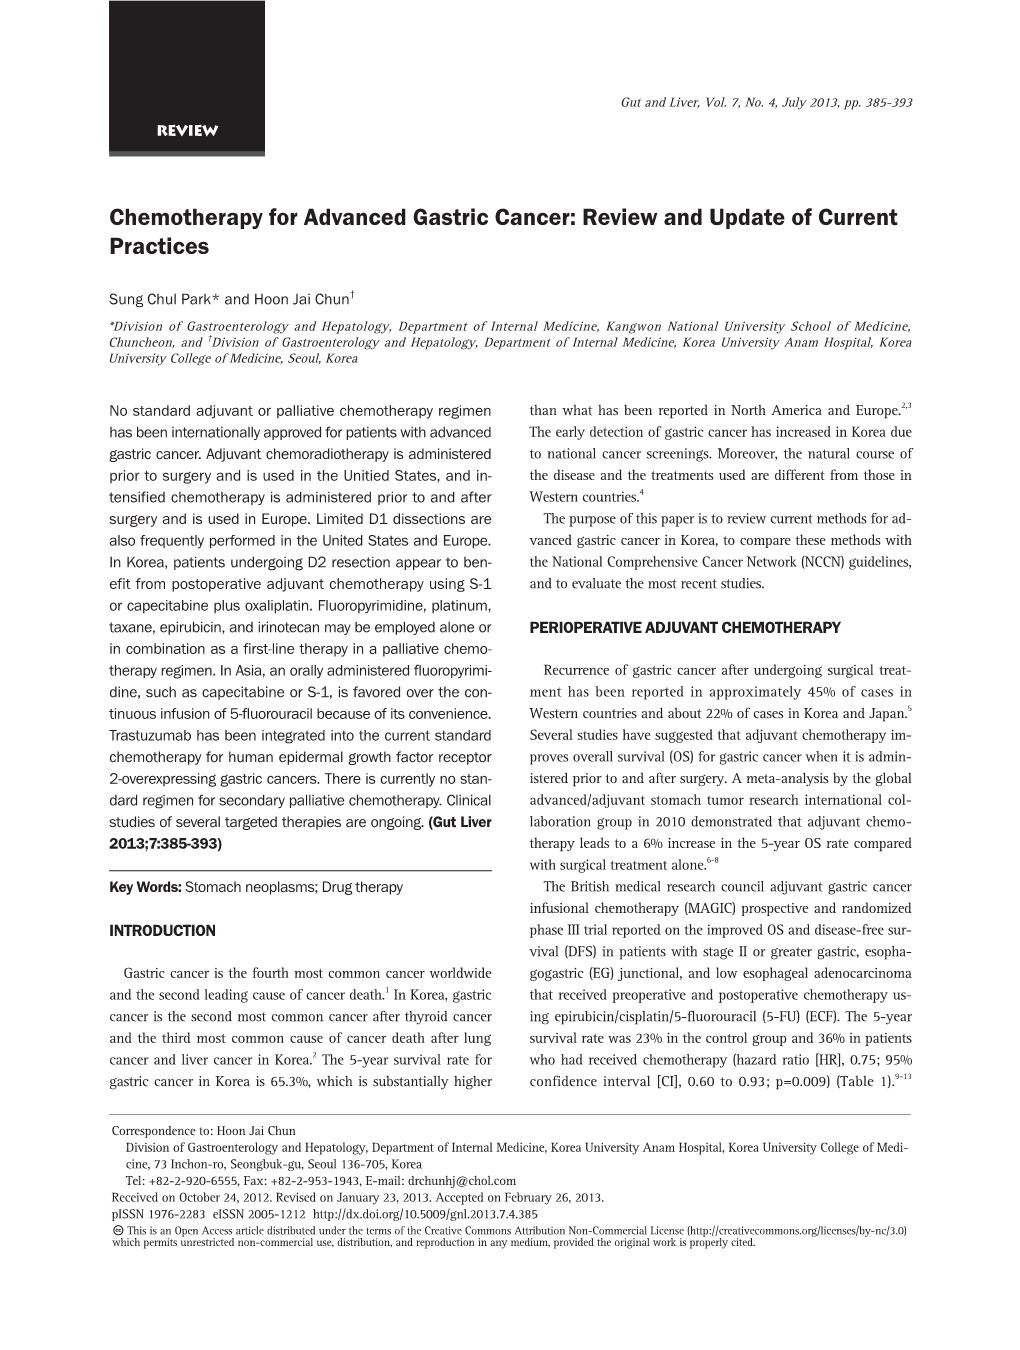 Chemotherapy for Advanced Gastric Cancer: Review and Update of Current Practices